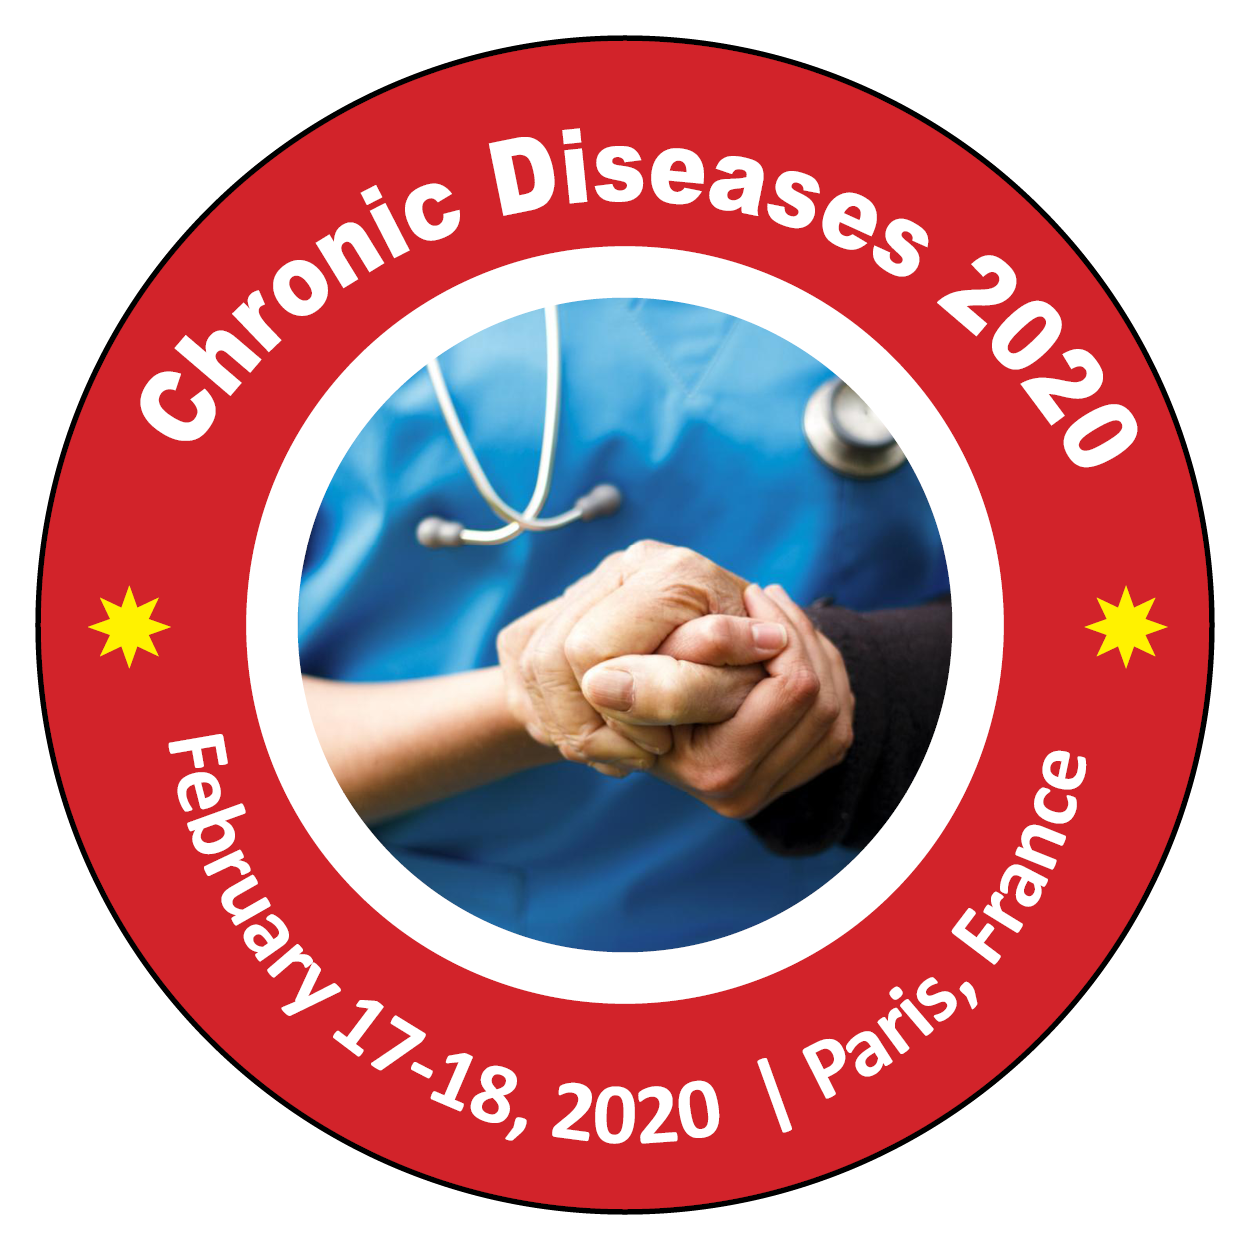 4th International Conference on Chronic Diseases